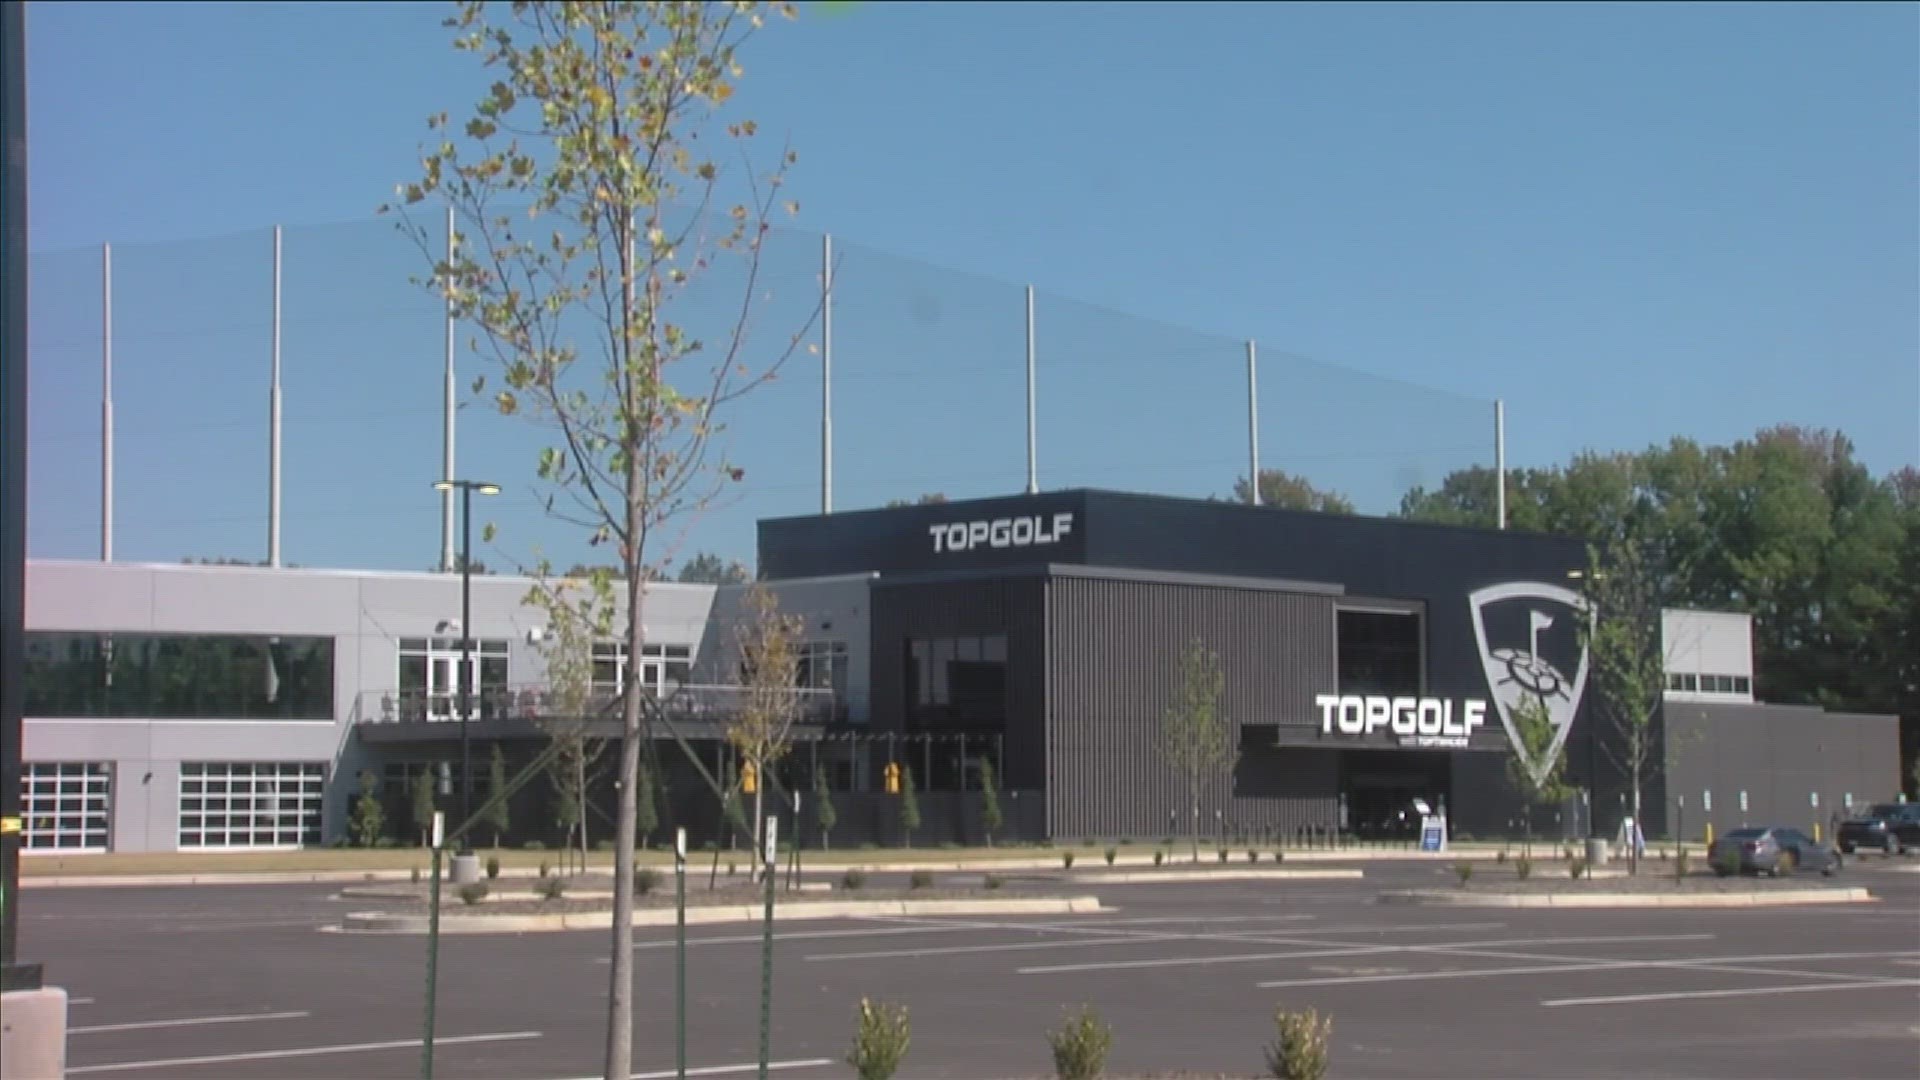 The venue is Topgolf’s fourth in the state. They expect to have about 400 employees.